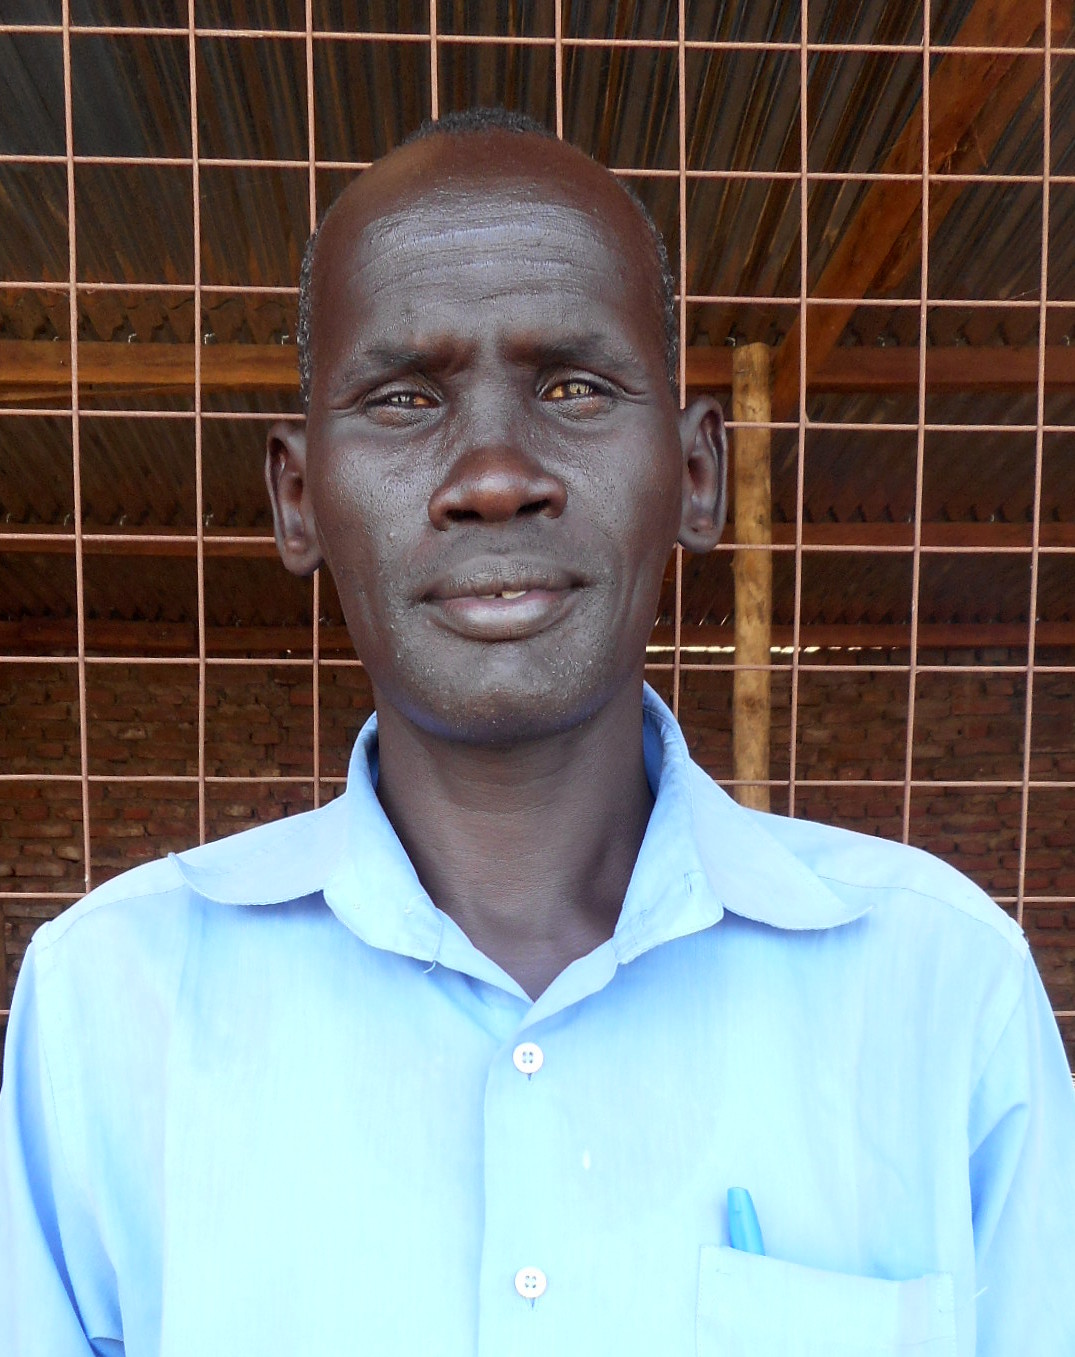 Marier Babuoth Ruot, miraculously saved on the roadside between Ethiopia and South Sudan, credits God's goodness and power.